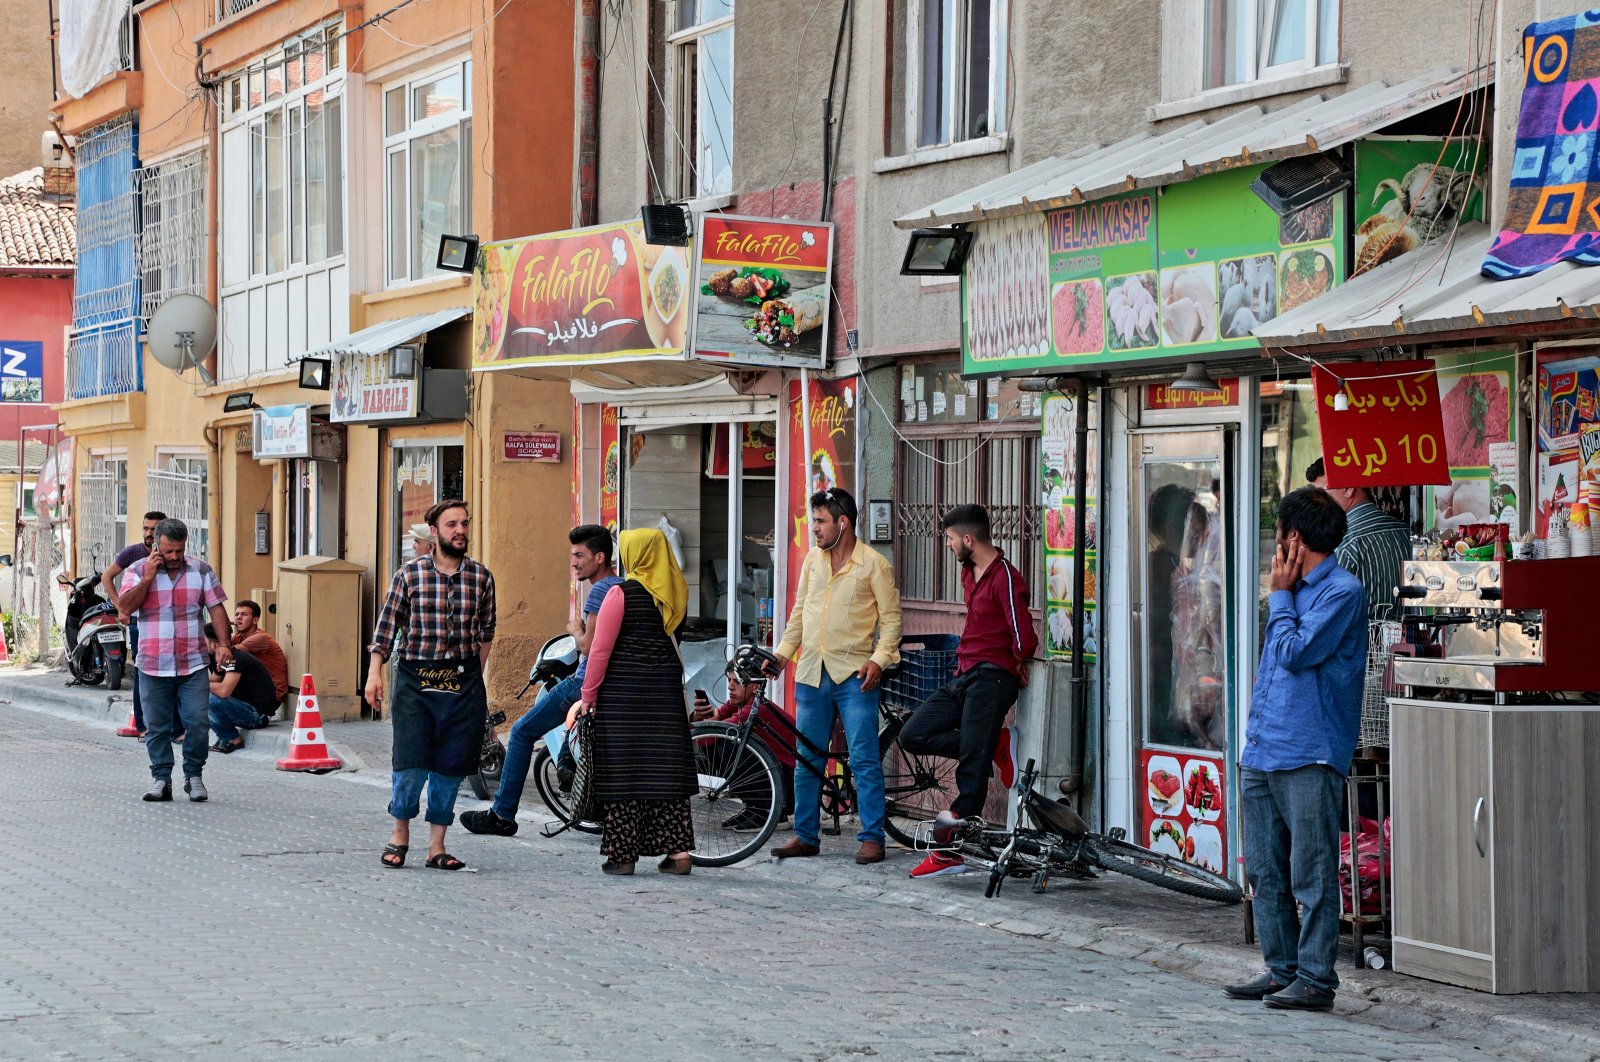 A view from the Sahibi Ata neighborhood where Syrian refugees live in Konya, Turkey, July 16, 2019. (Shutterstock)